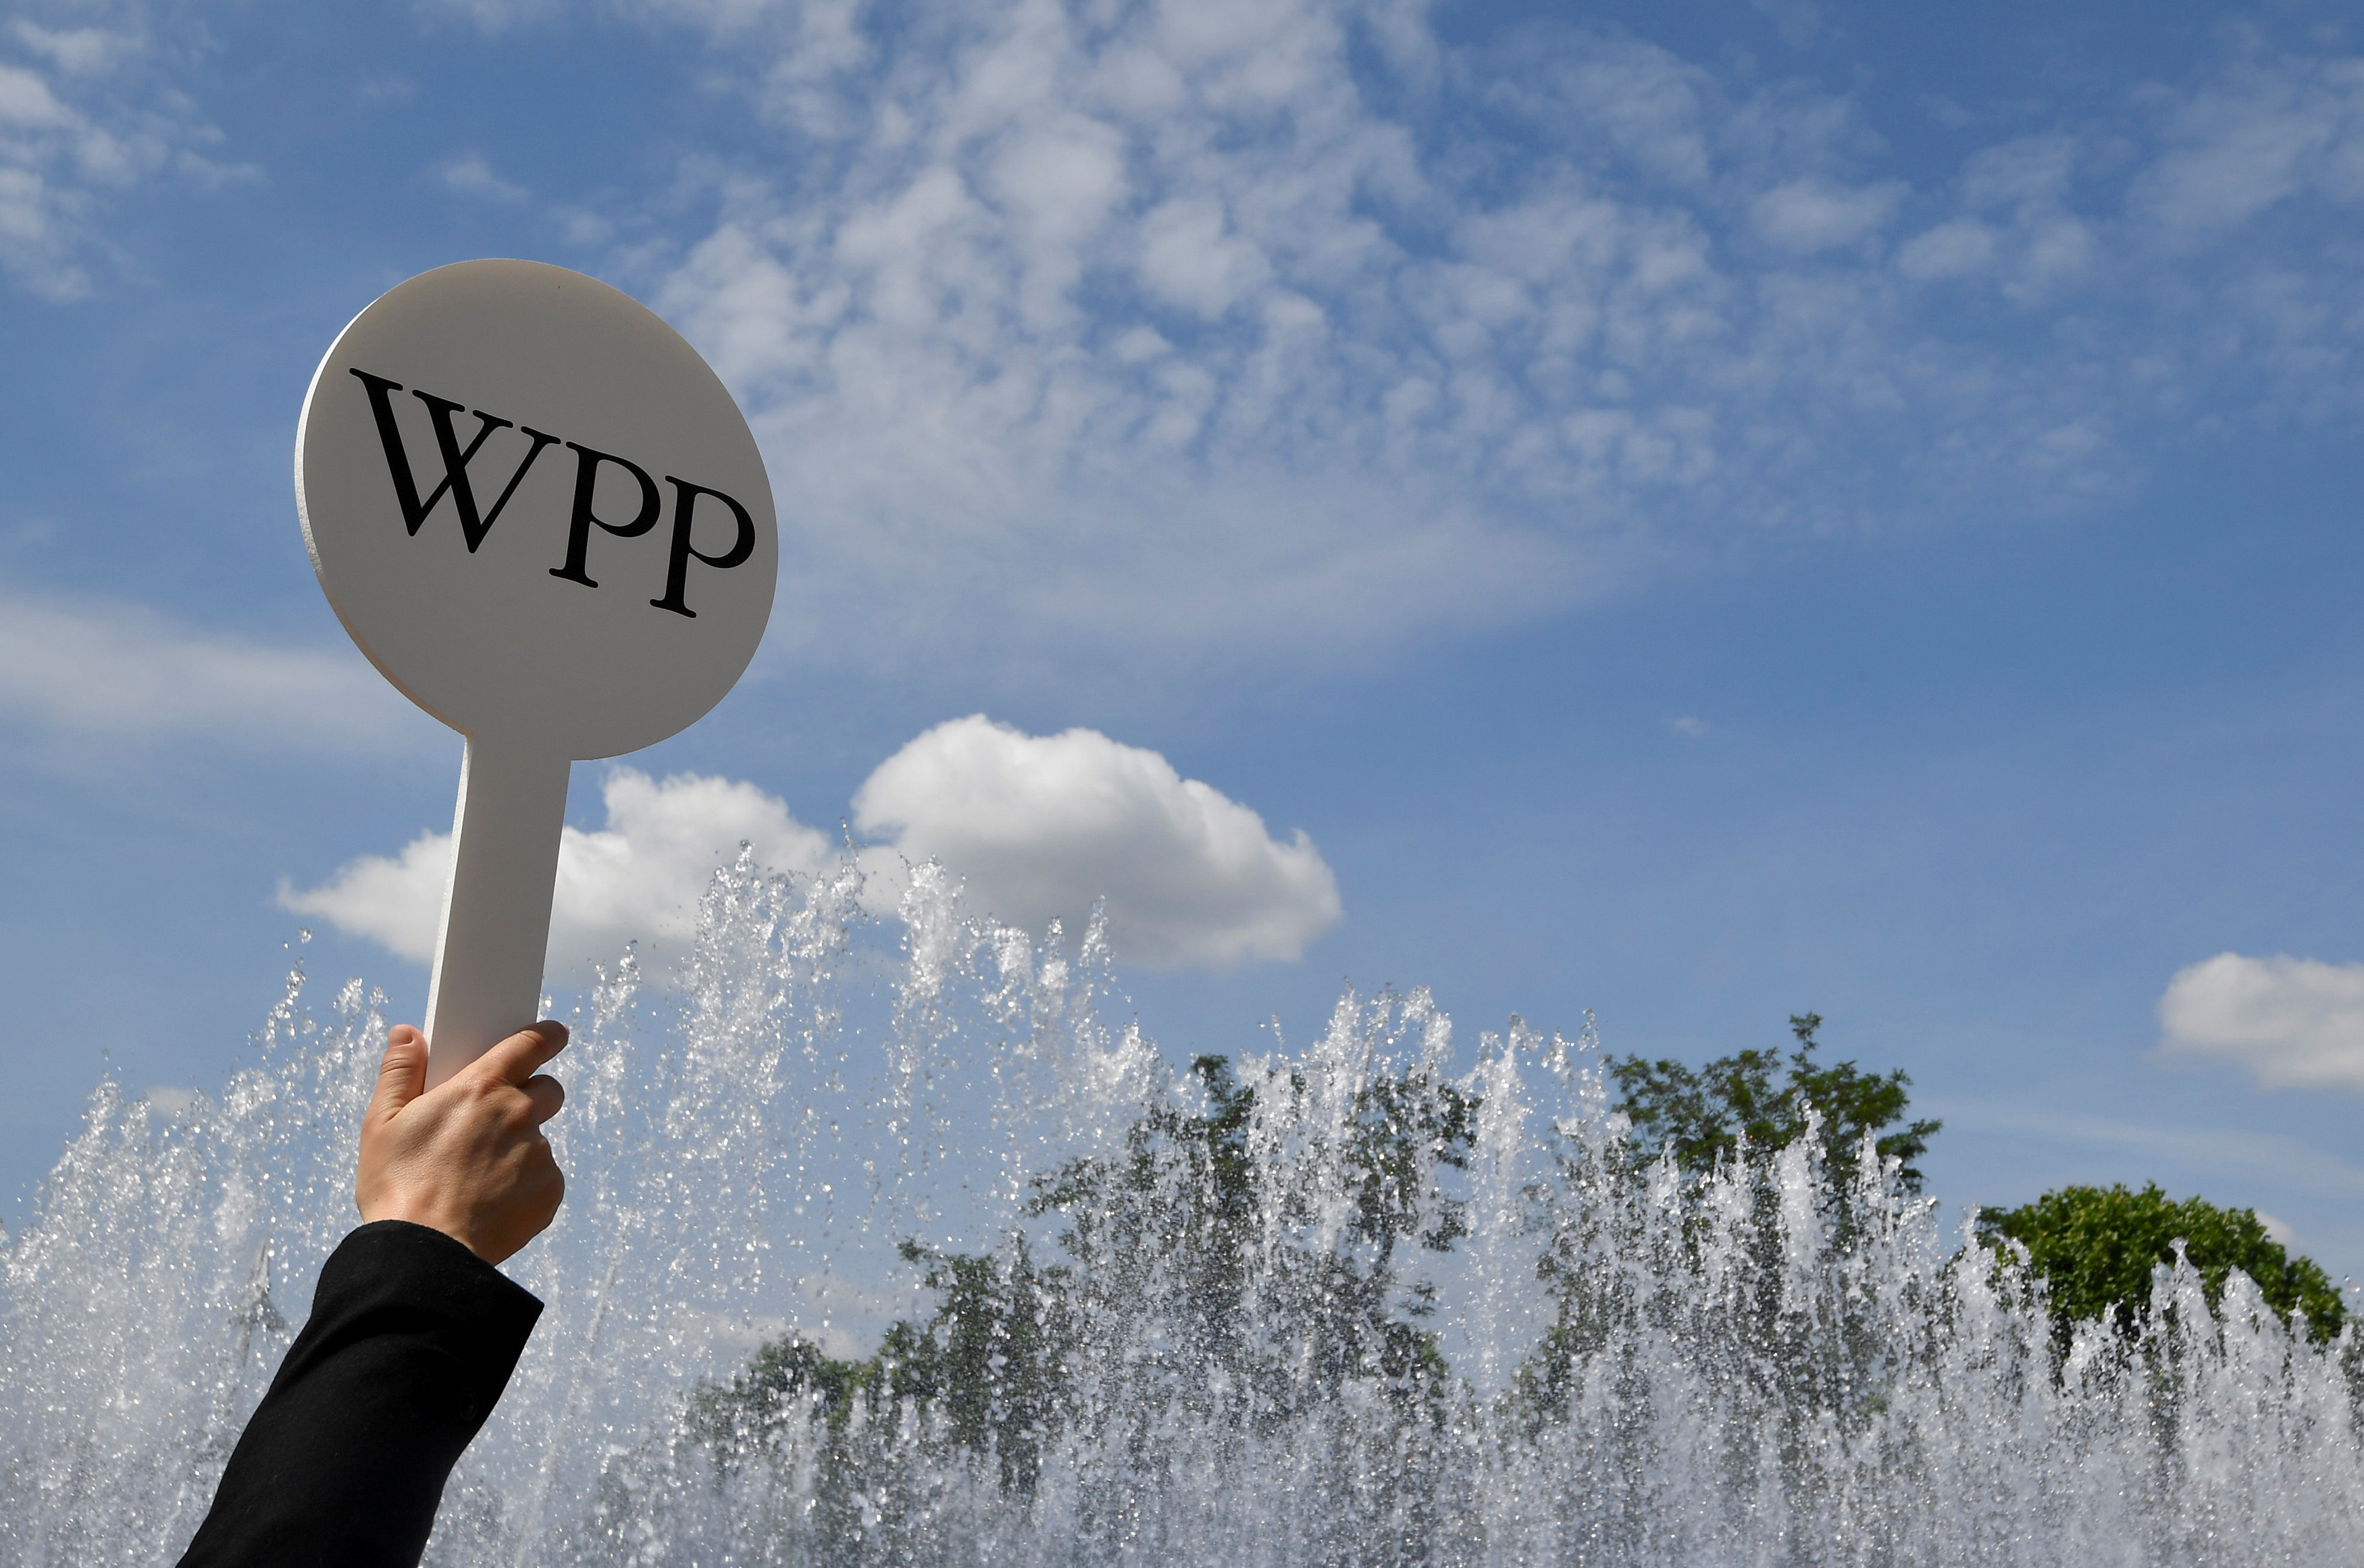 WPP names Read as new CEO after Sorrell